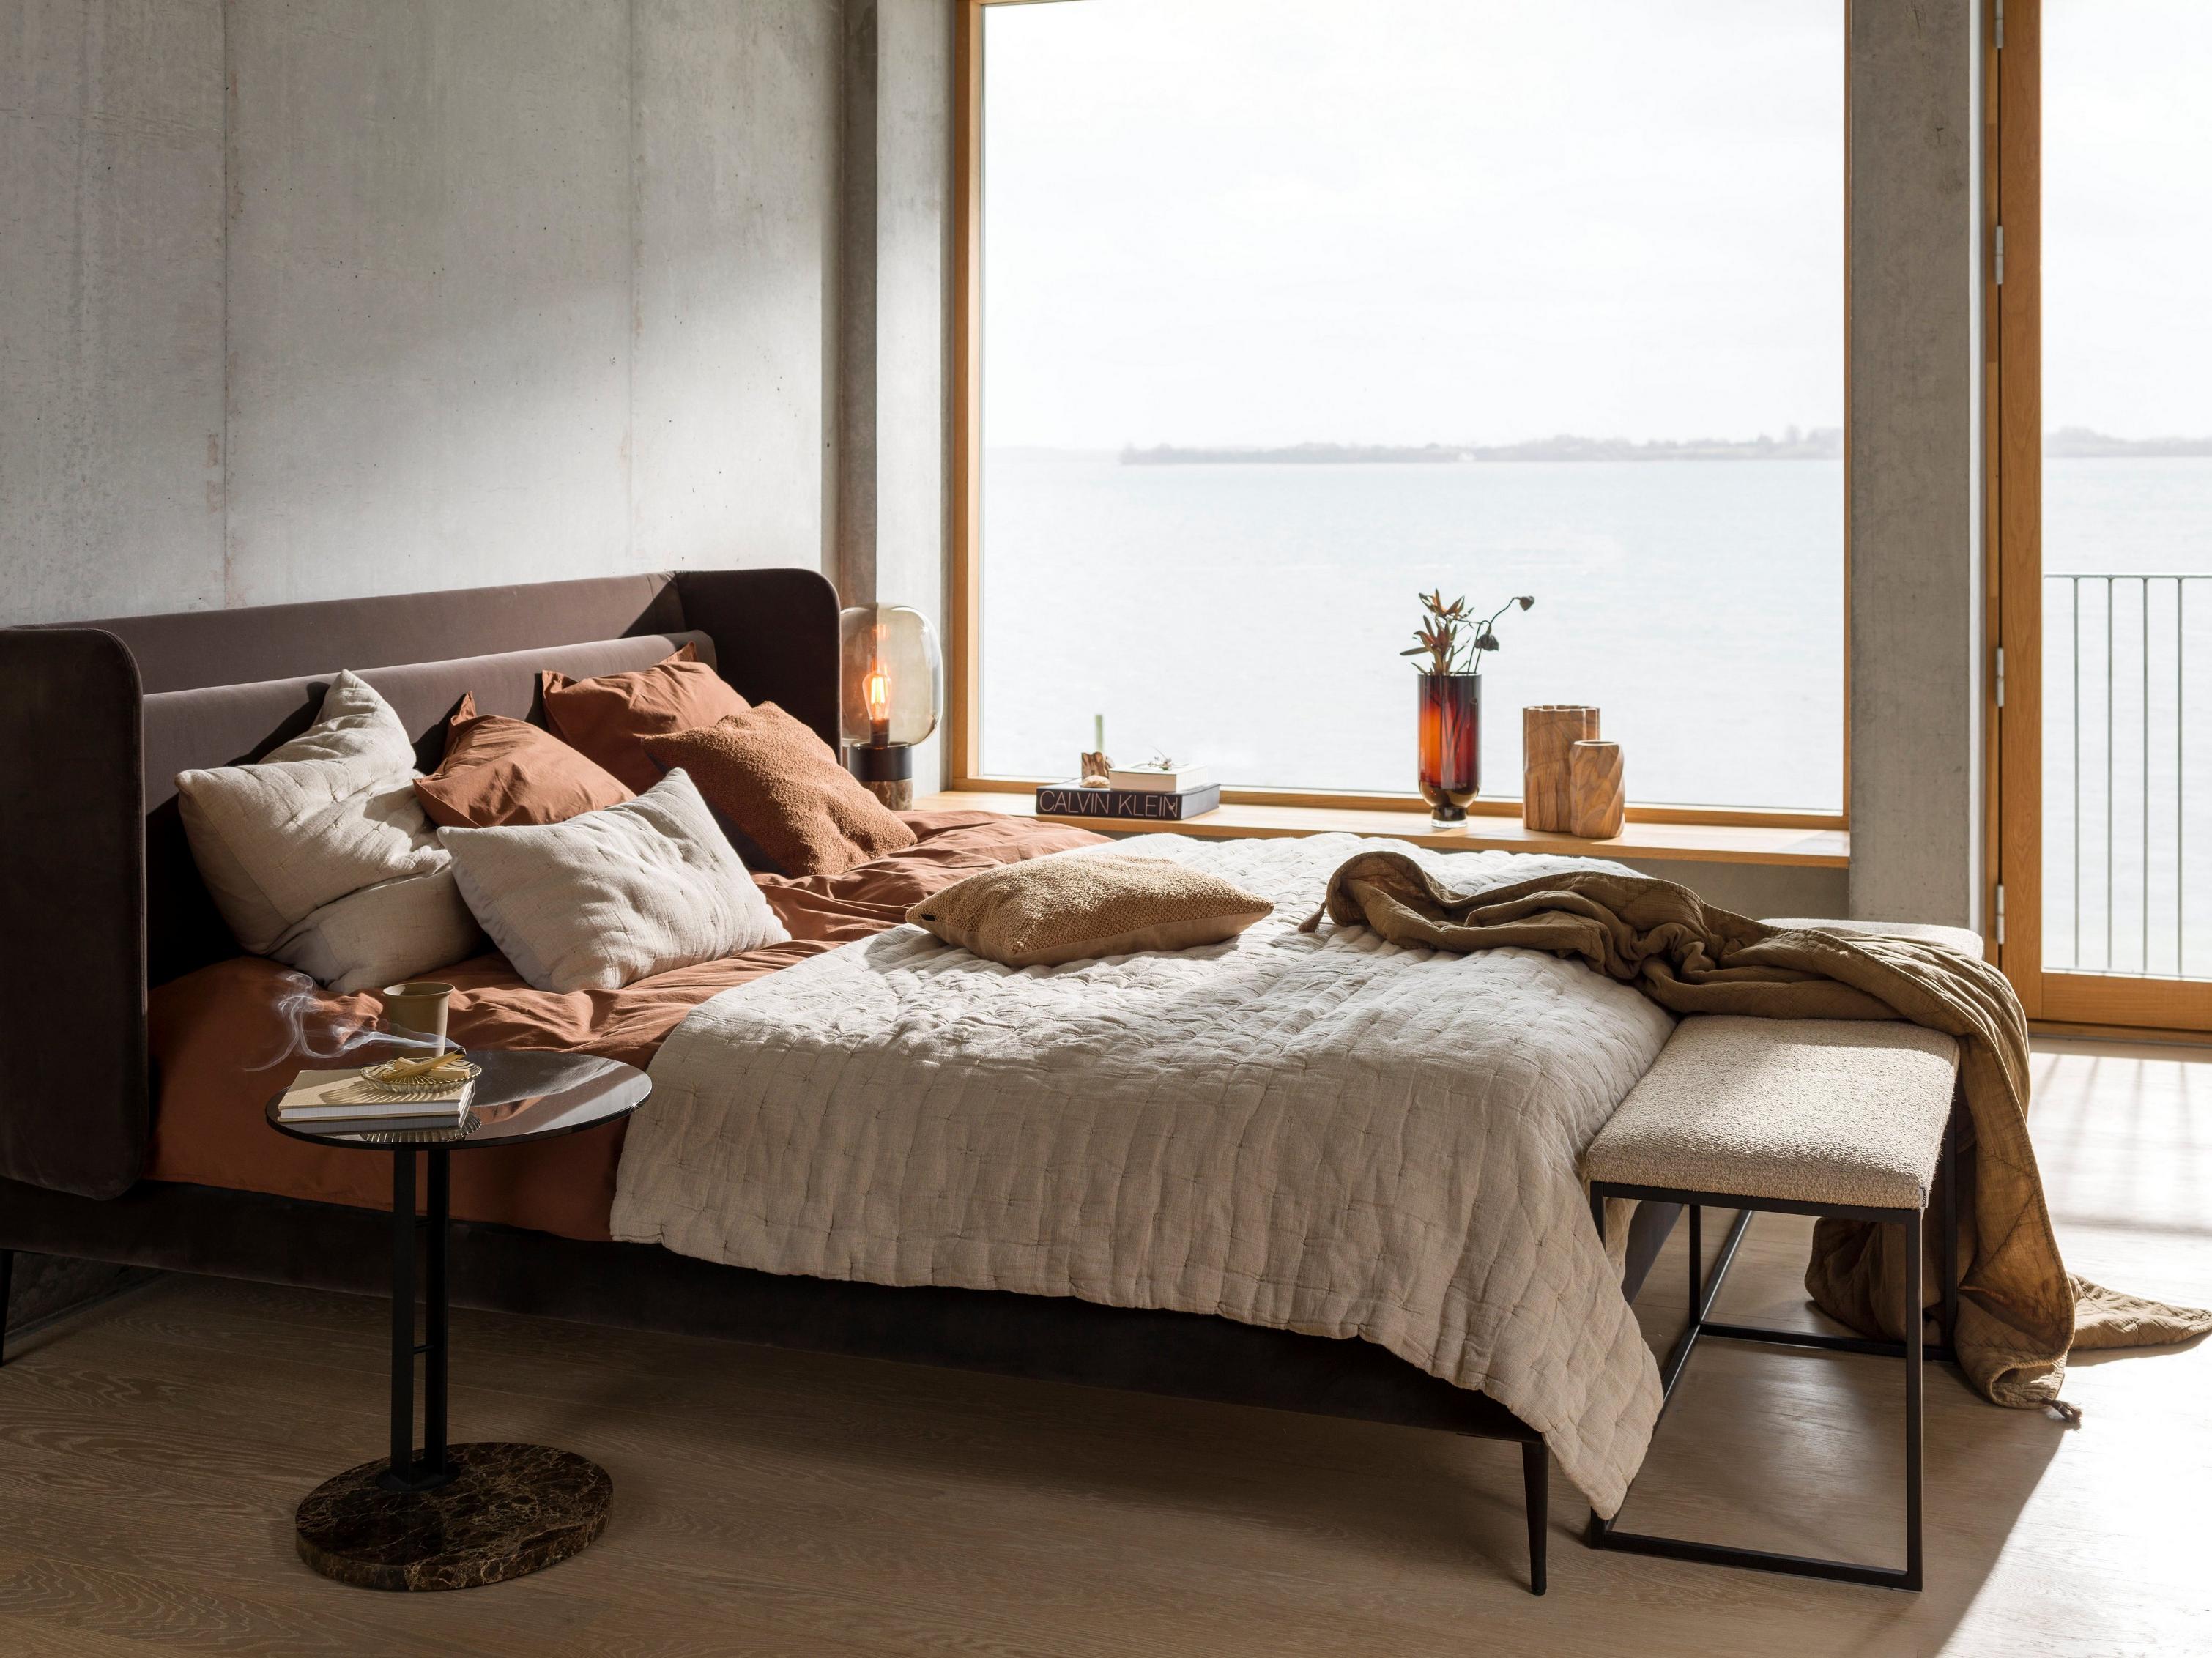 Cozy bedroom with a view of the water, featuring earth-toned bedding and a small side table.